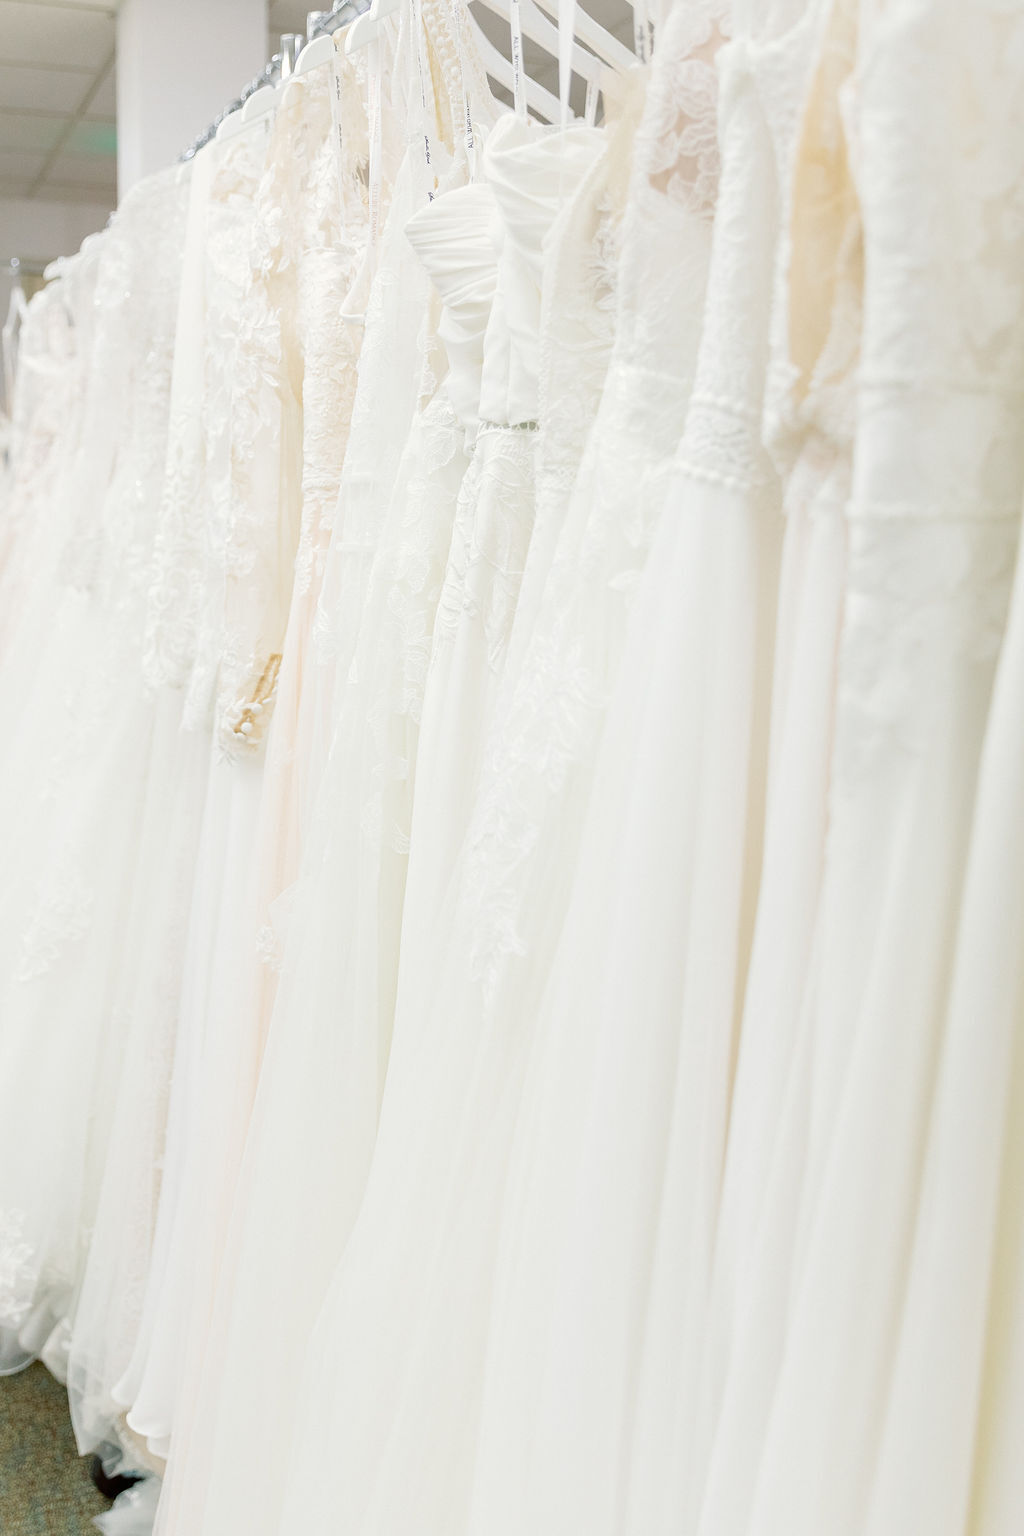 Tips to picking your wedding dress shop Image